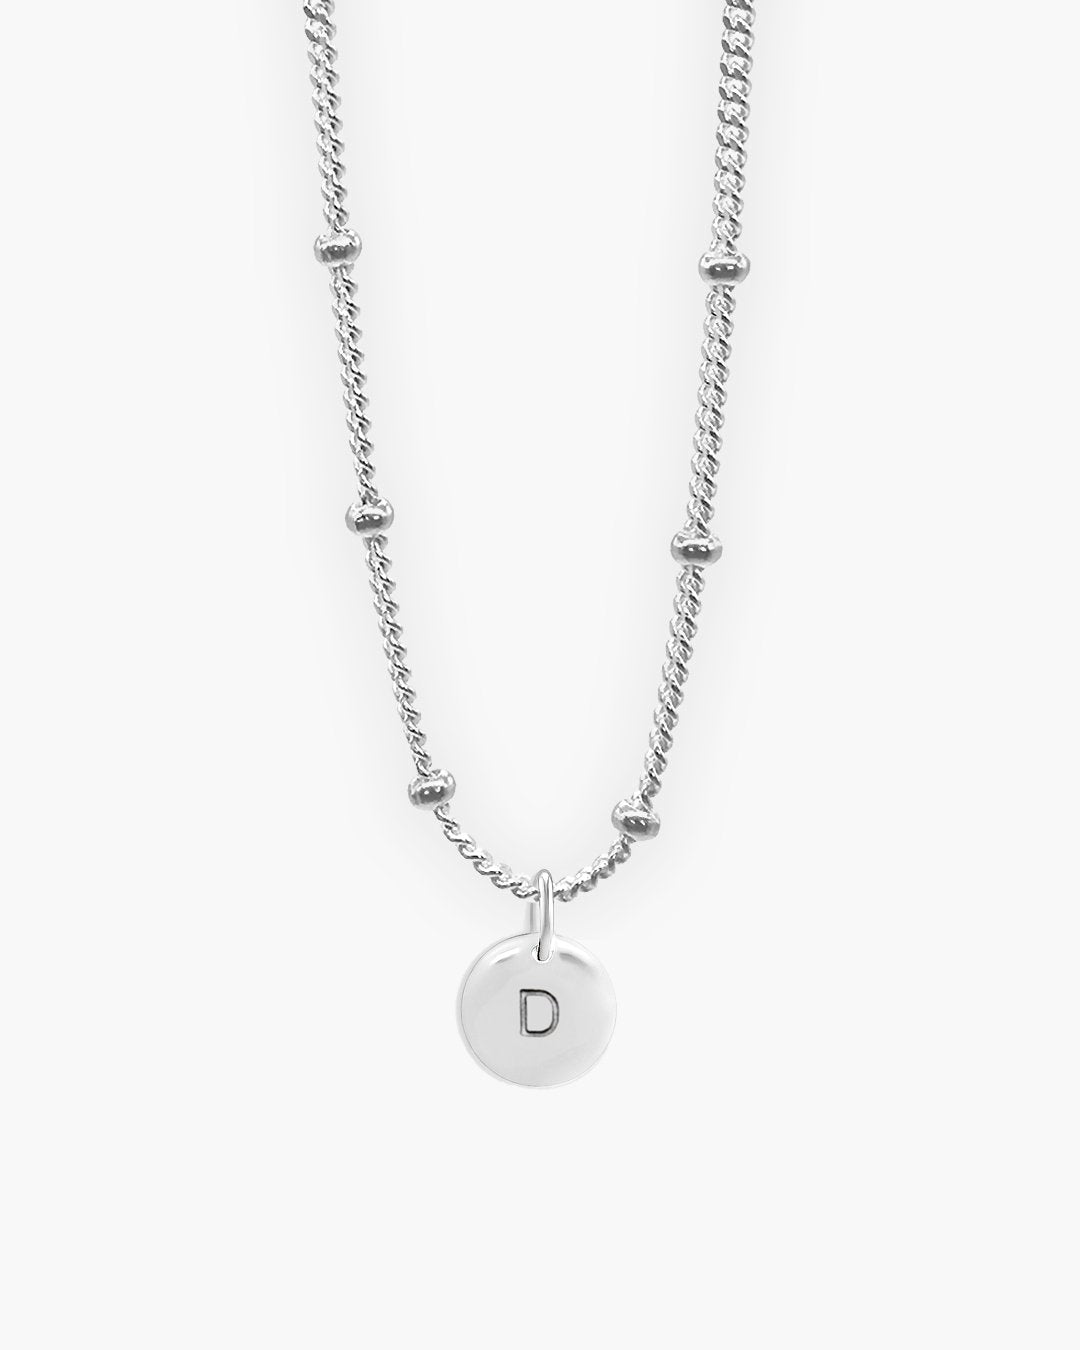 Silver Round Love Letter D Necklace